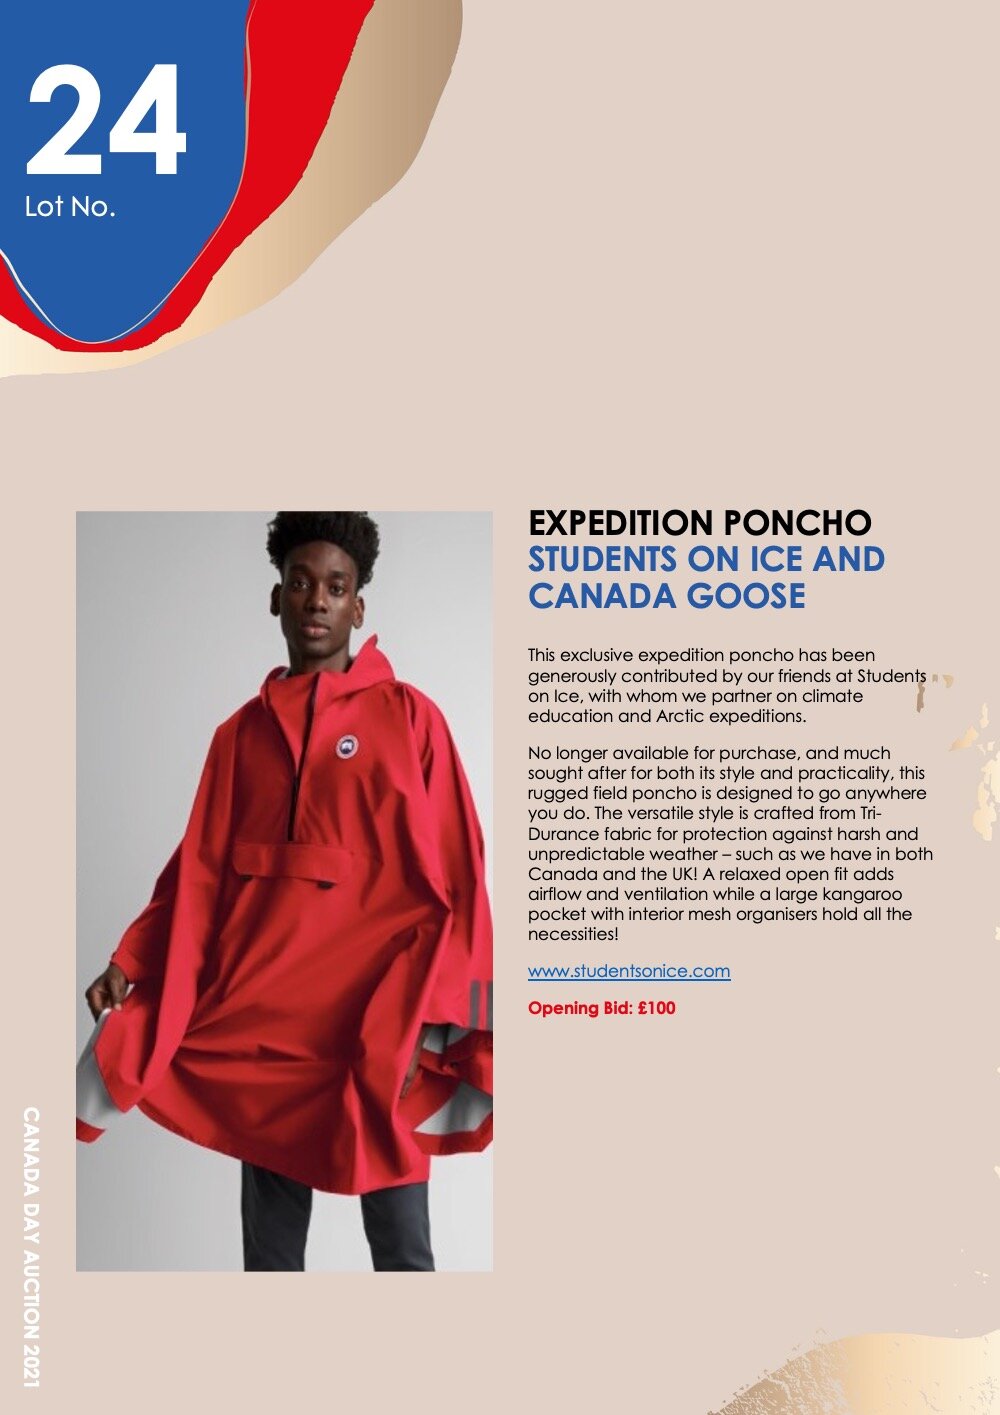   Lot 24: EXPEDITION PONCHO     STUDENTS ON ICE AND CANADA GOOSE    This exclusive expedition poncho has been generously contributed by our friends at Students on Ice, with whom we partner on climate education and Arctic expeditions.   No longer avai